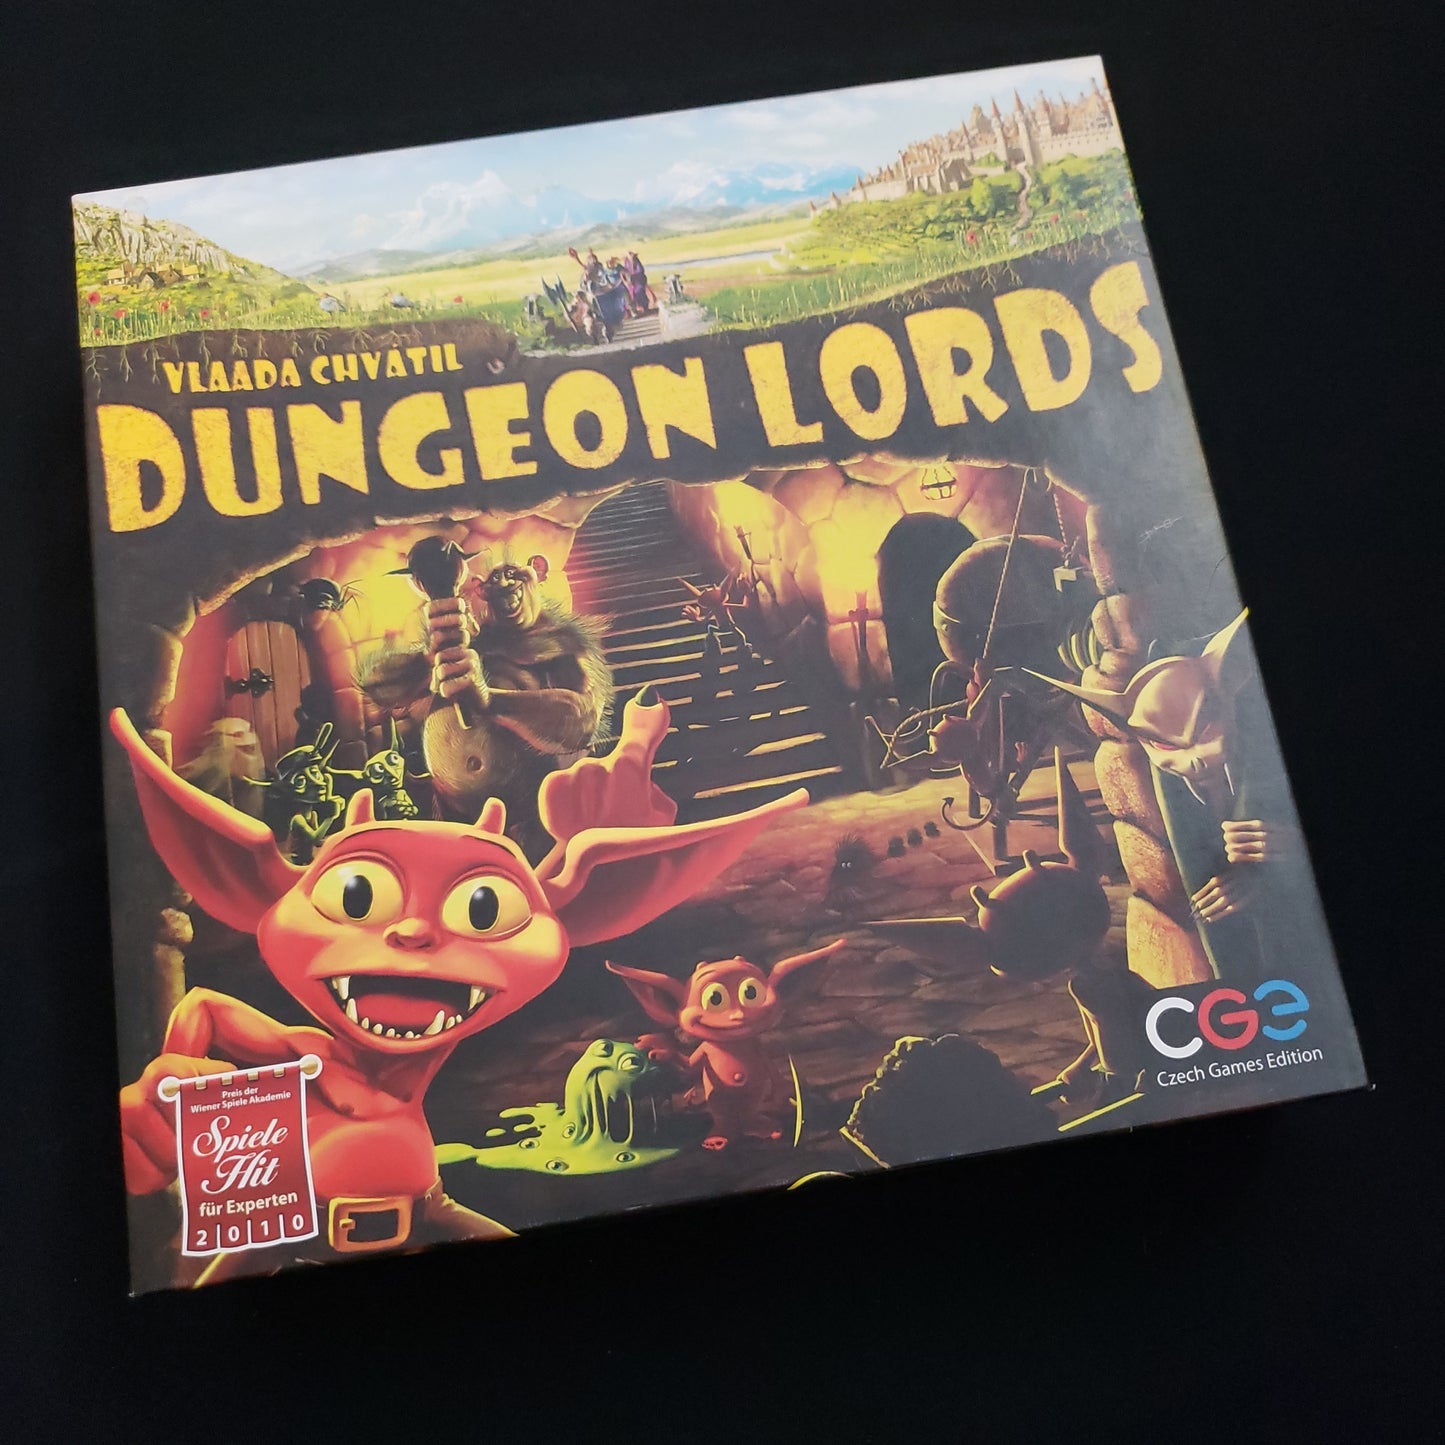 Image shows the front cover of the box of the Dungeon Lords board game